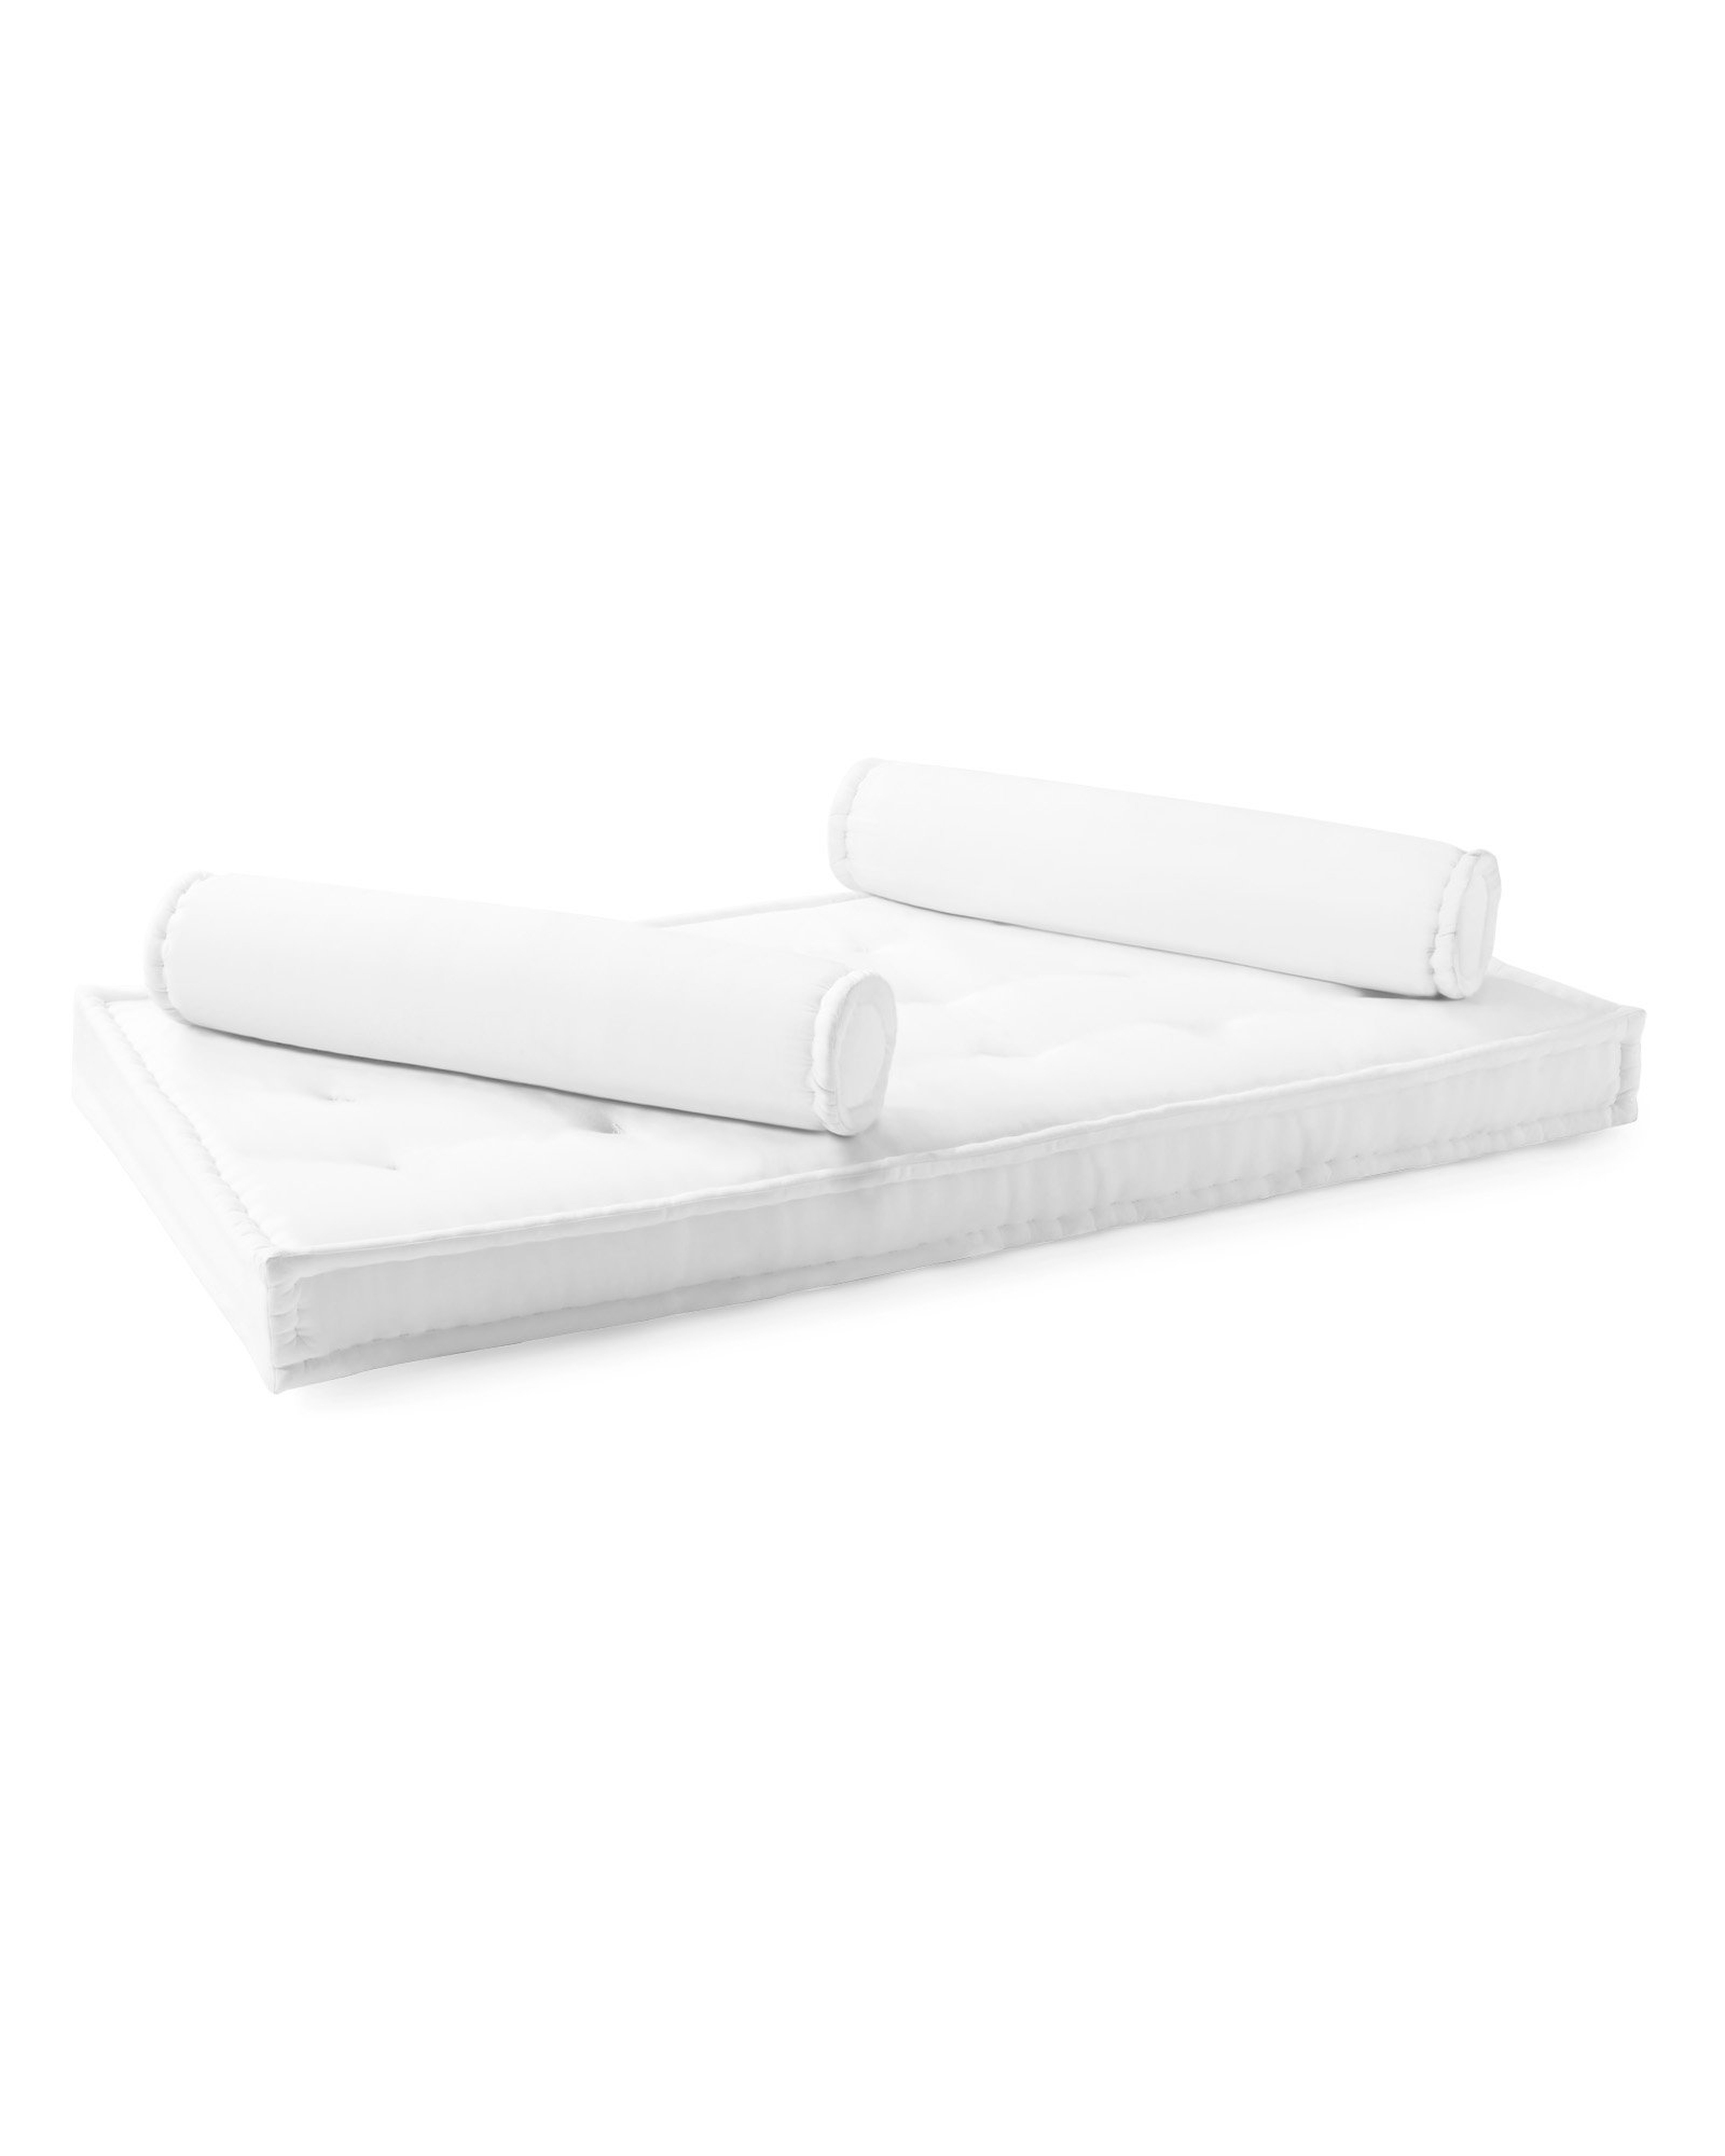 Sausalito Outdoor Daybed Mattress & Bolster Pillows - Sunbrella White Canvas - Serena and Lily